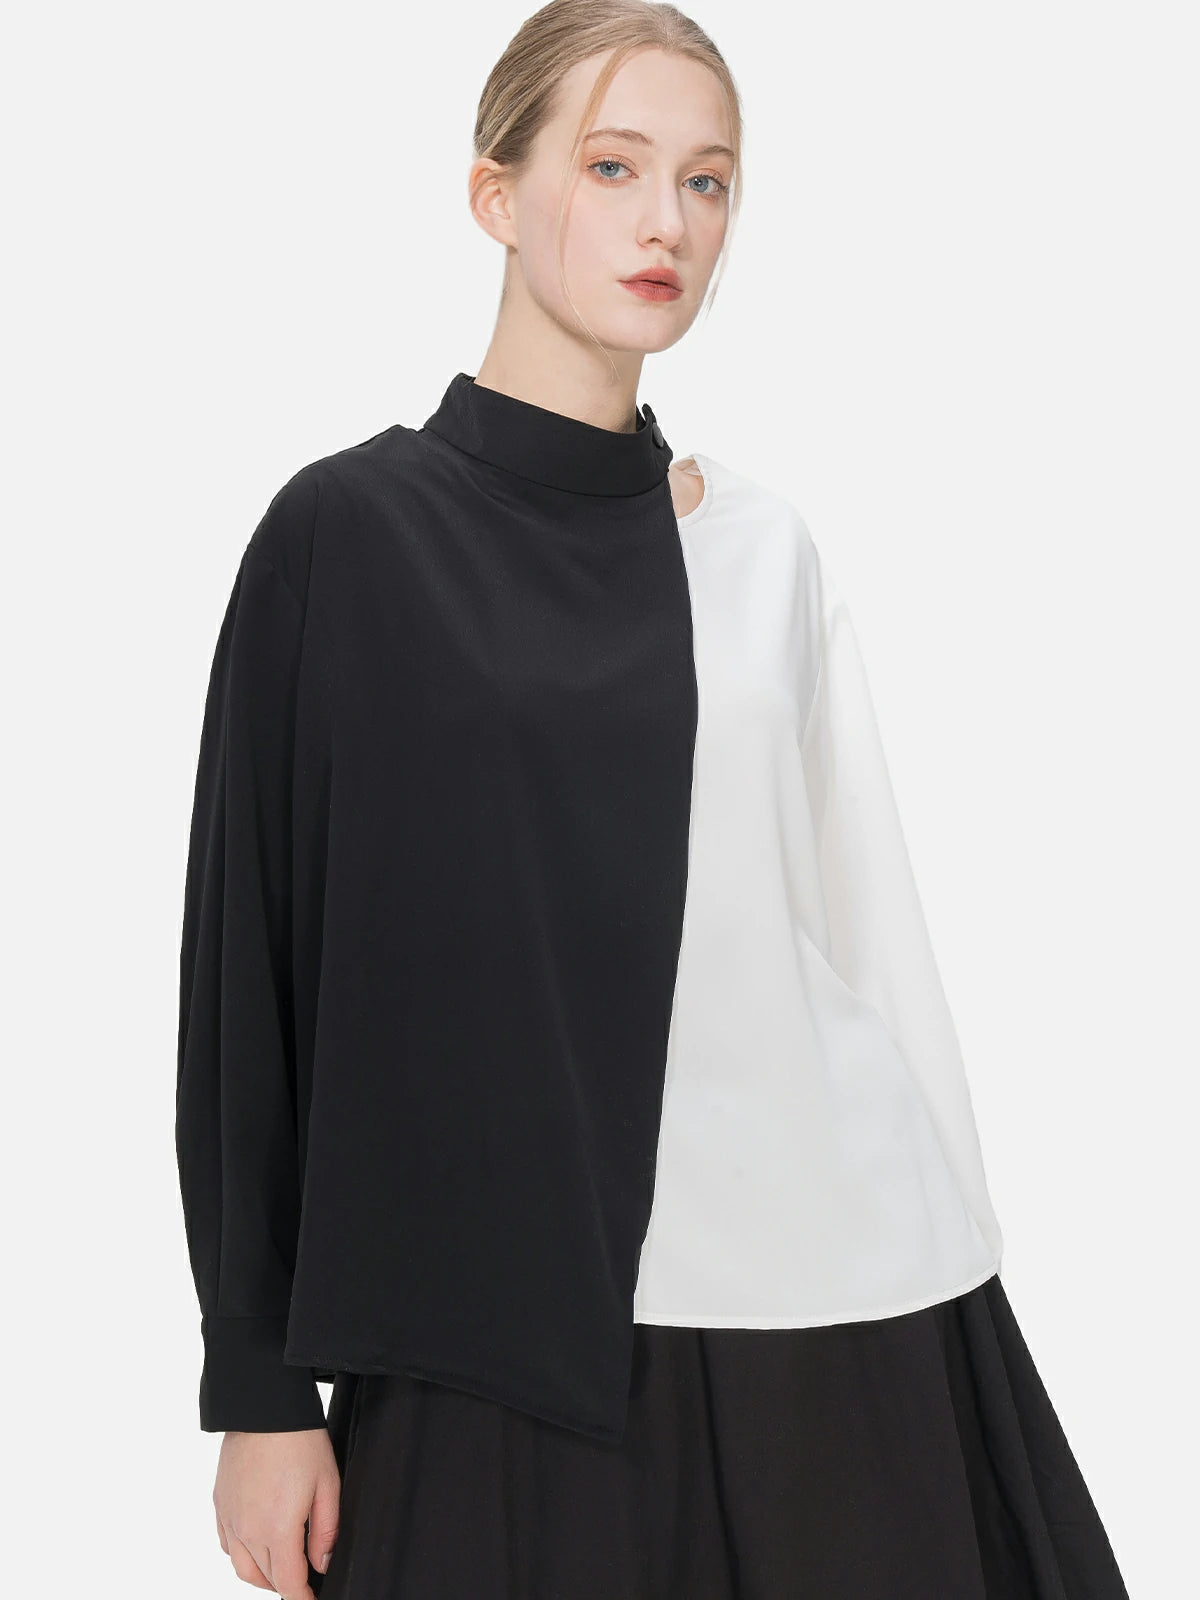 Unique charm: black and white color-blocked shirt with a collarbone hollow design, combining a tailored fit with a minimalist aesthetic for an attention-grabbing appearance.